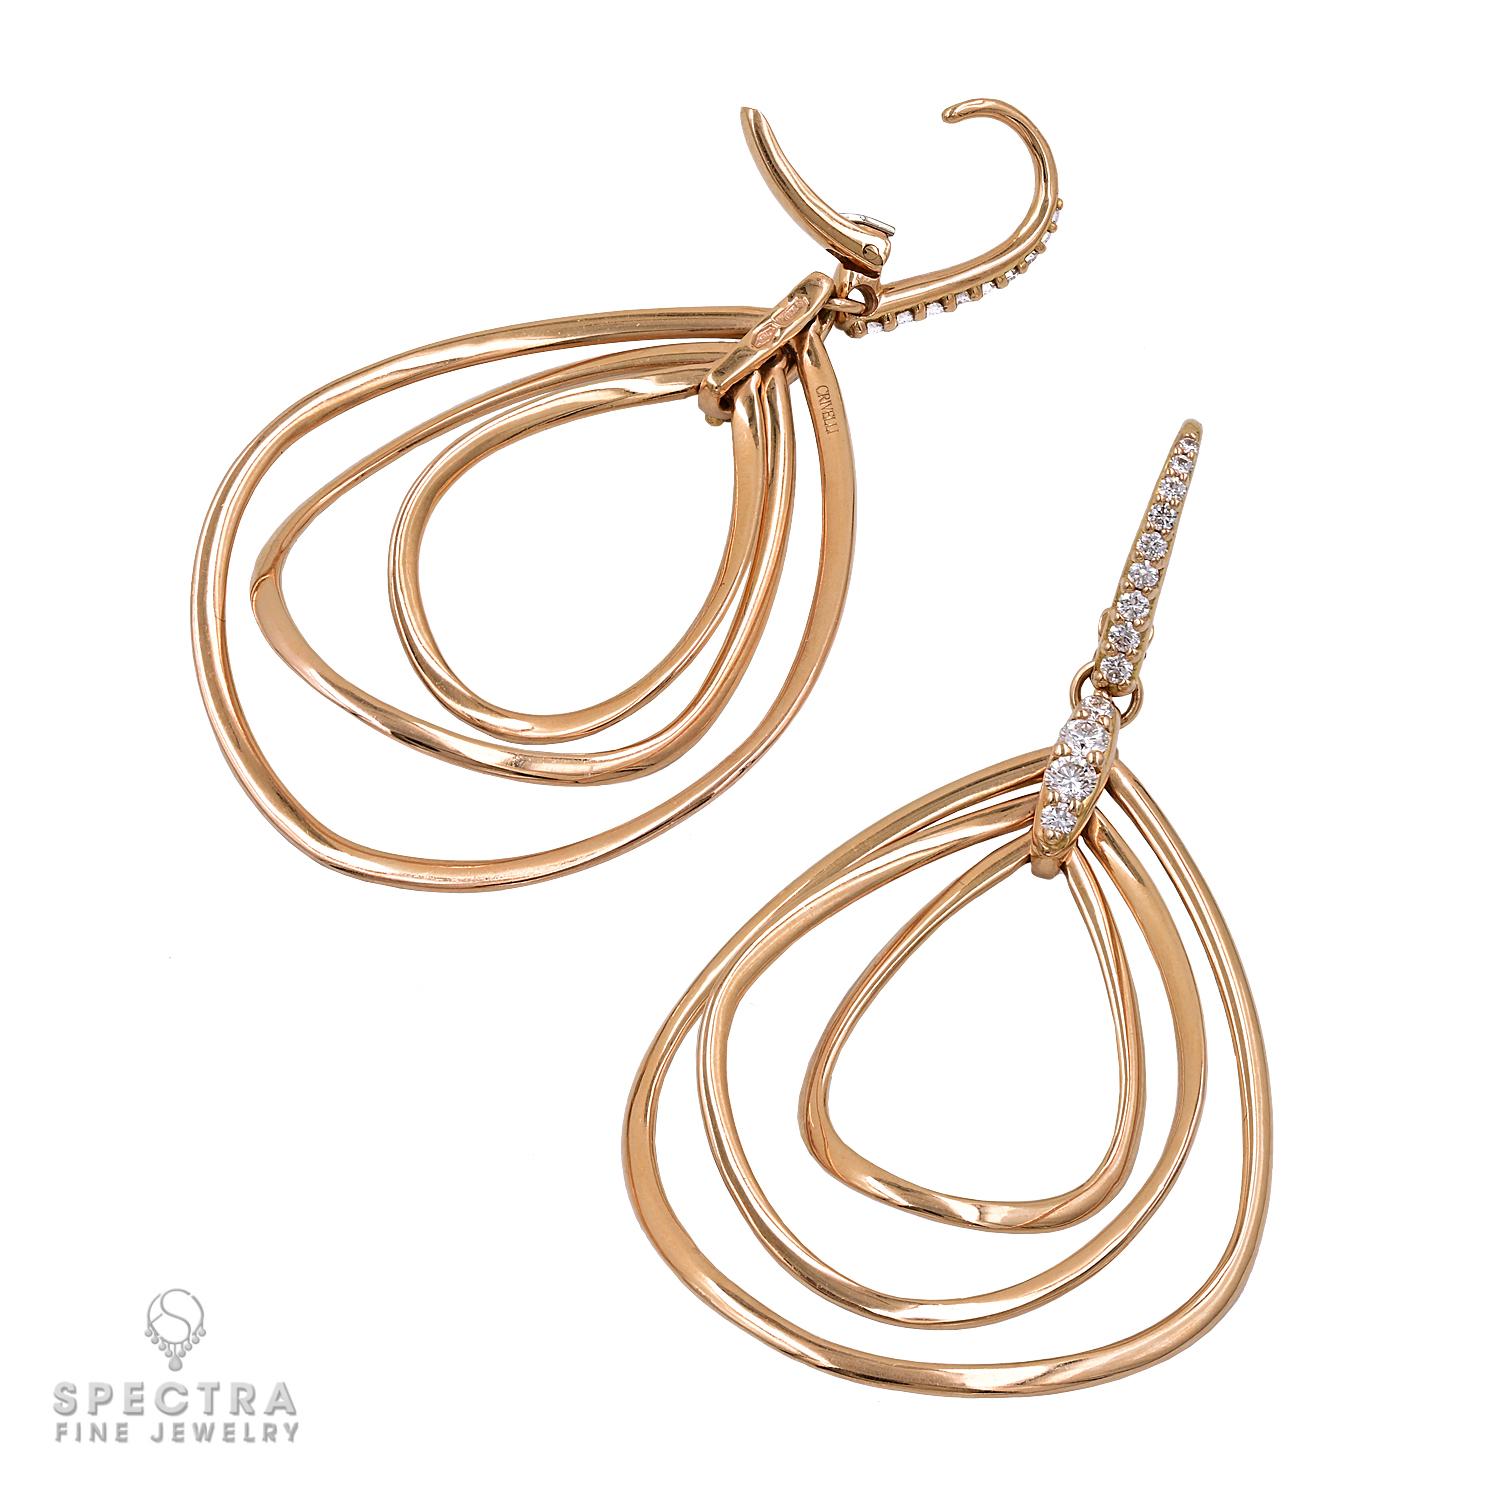 Fashioned from 18K yellow gold, this slightly asymmetrical sculptural pair of earrings showcases three nested openwork teardrops, gently hammered flat with organic curves that appear handcrafted, creating the illusion of floating as a unified